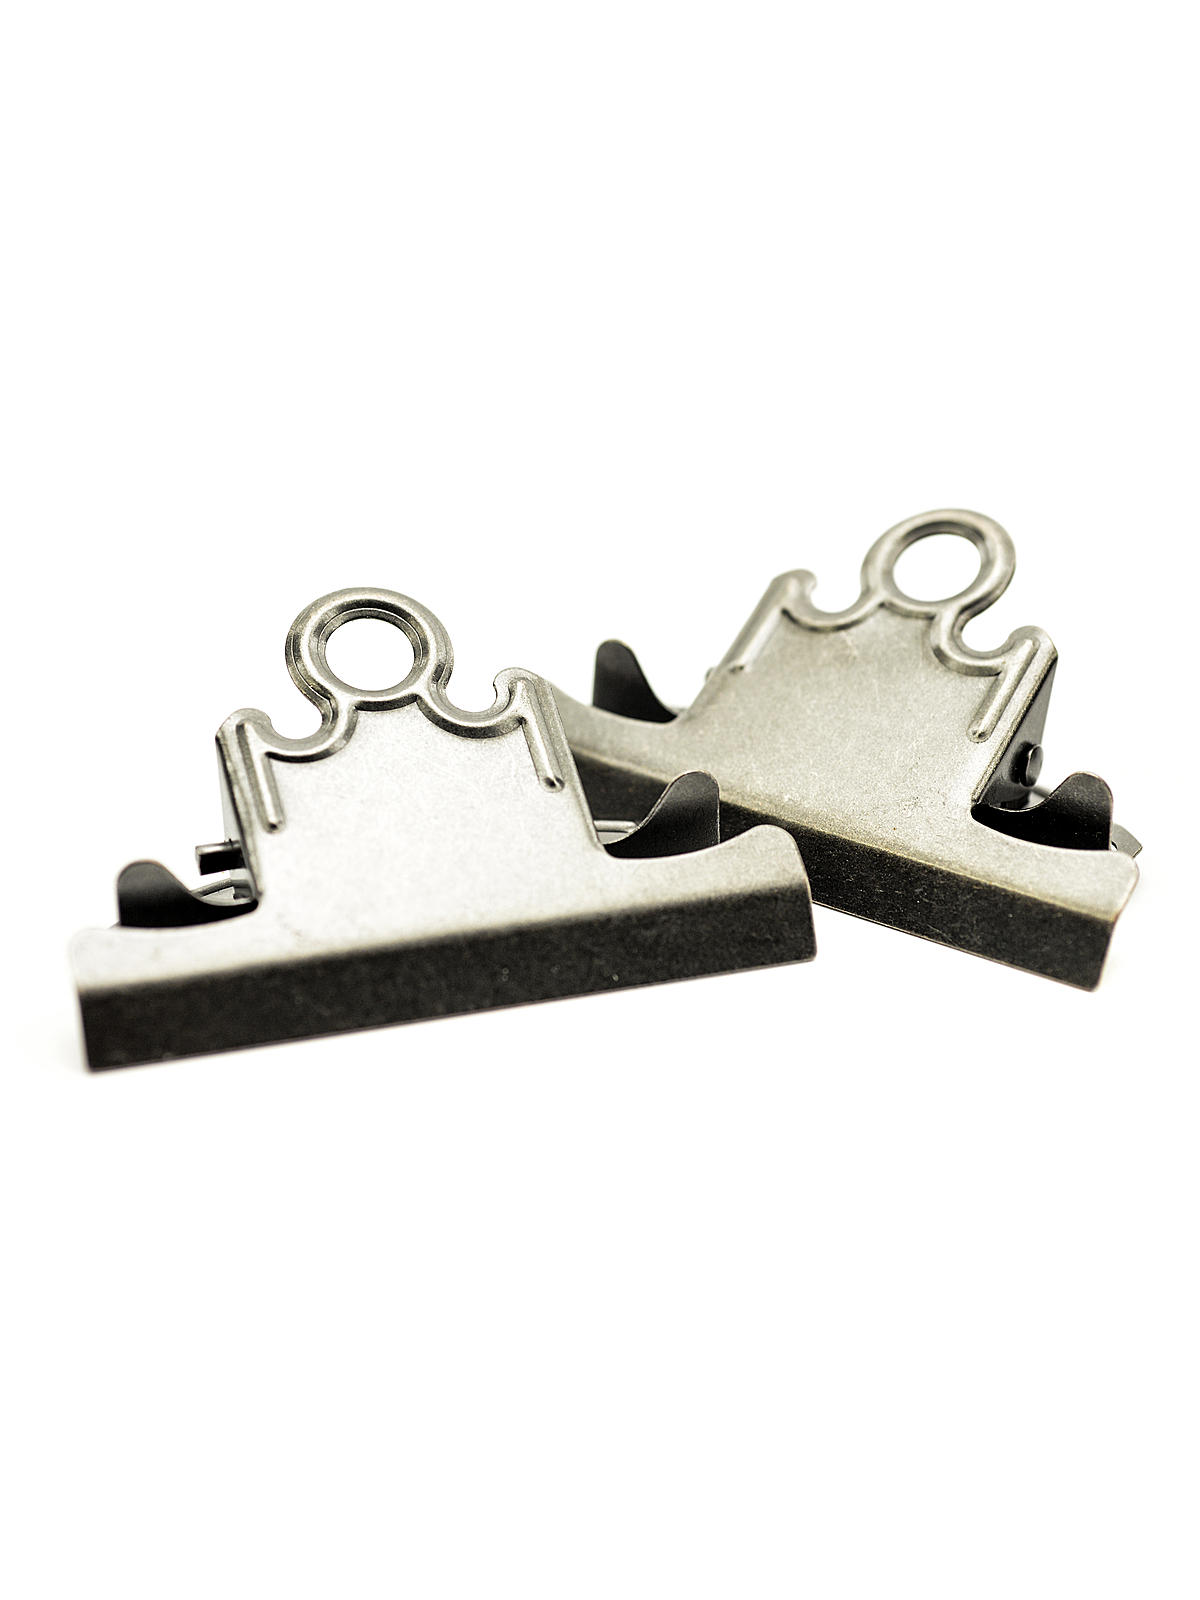 Idea-ology Fasteners Pack Of 2 Antique Nickel Finish 3 In. Clipboard Clip